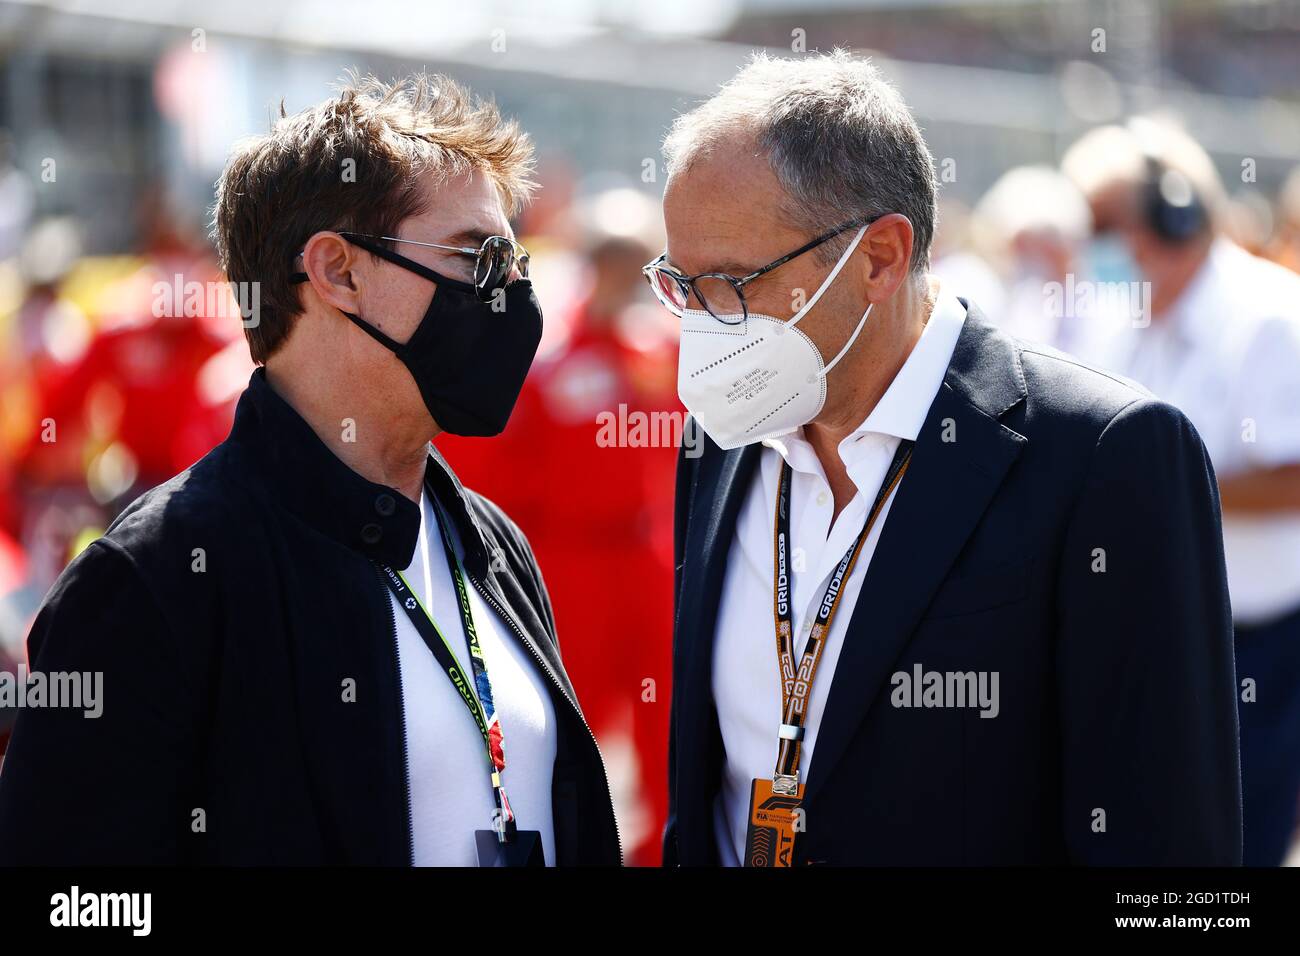 (L to R): Tom Cruise (GBR) Actor with Stefano Domenicali (ITA) Formula One President and CEO on the grid. British Grand Prix, Sunday 18th July 2021. Silverstone, England. FIA Pool Image for Editorial Use Only Stock Photo